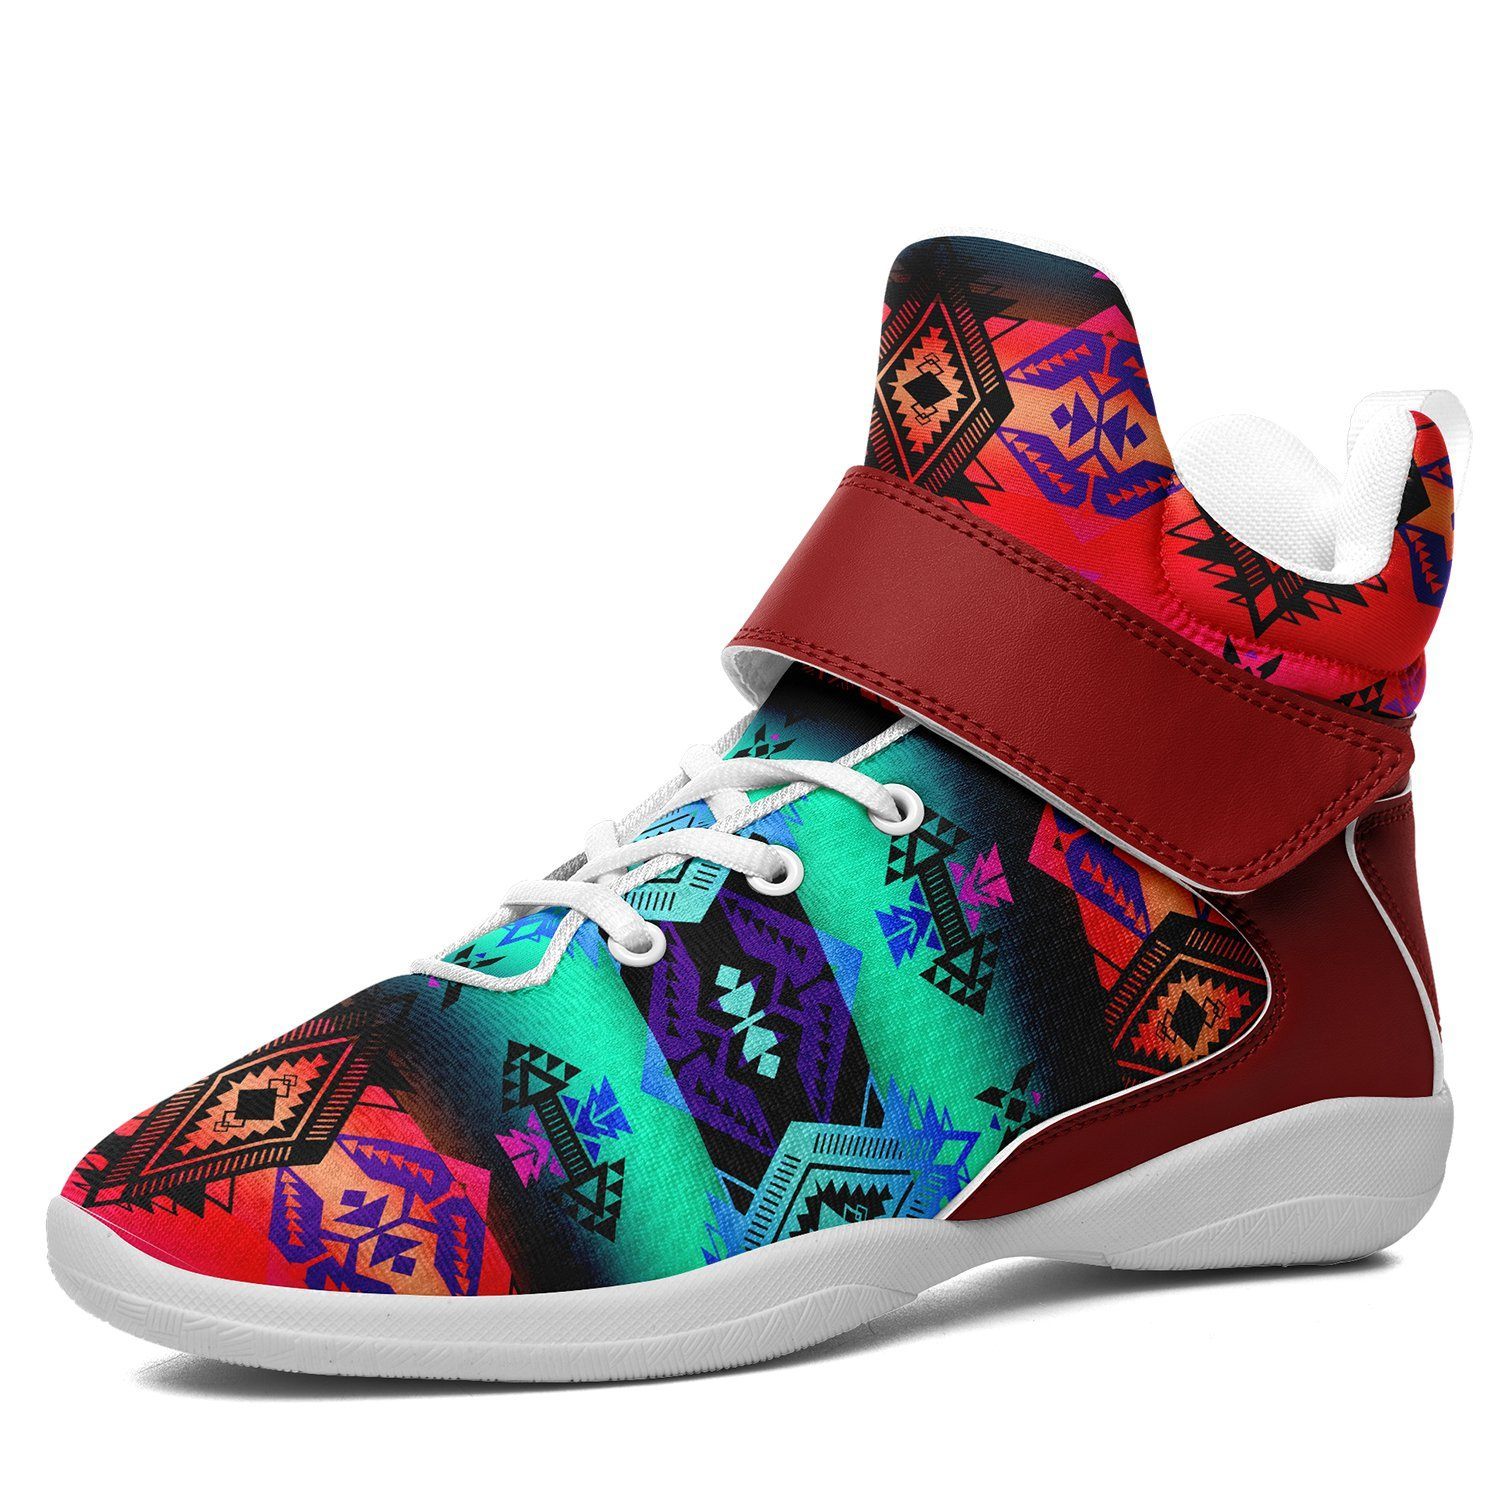 Sovereign Nation Sunrise Kid's Ipottaa Basketball / Sport High Top Shoes 49 Dzine US Child 12.5 / EUR 30 White Sole with Red Strap 